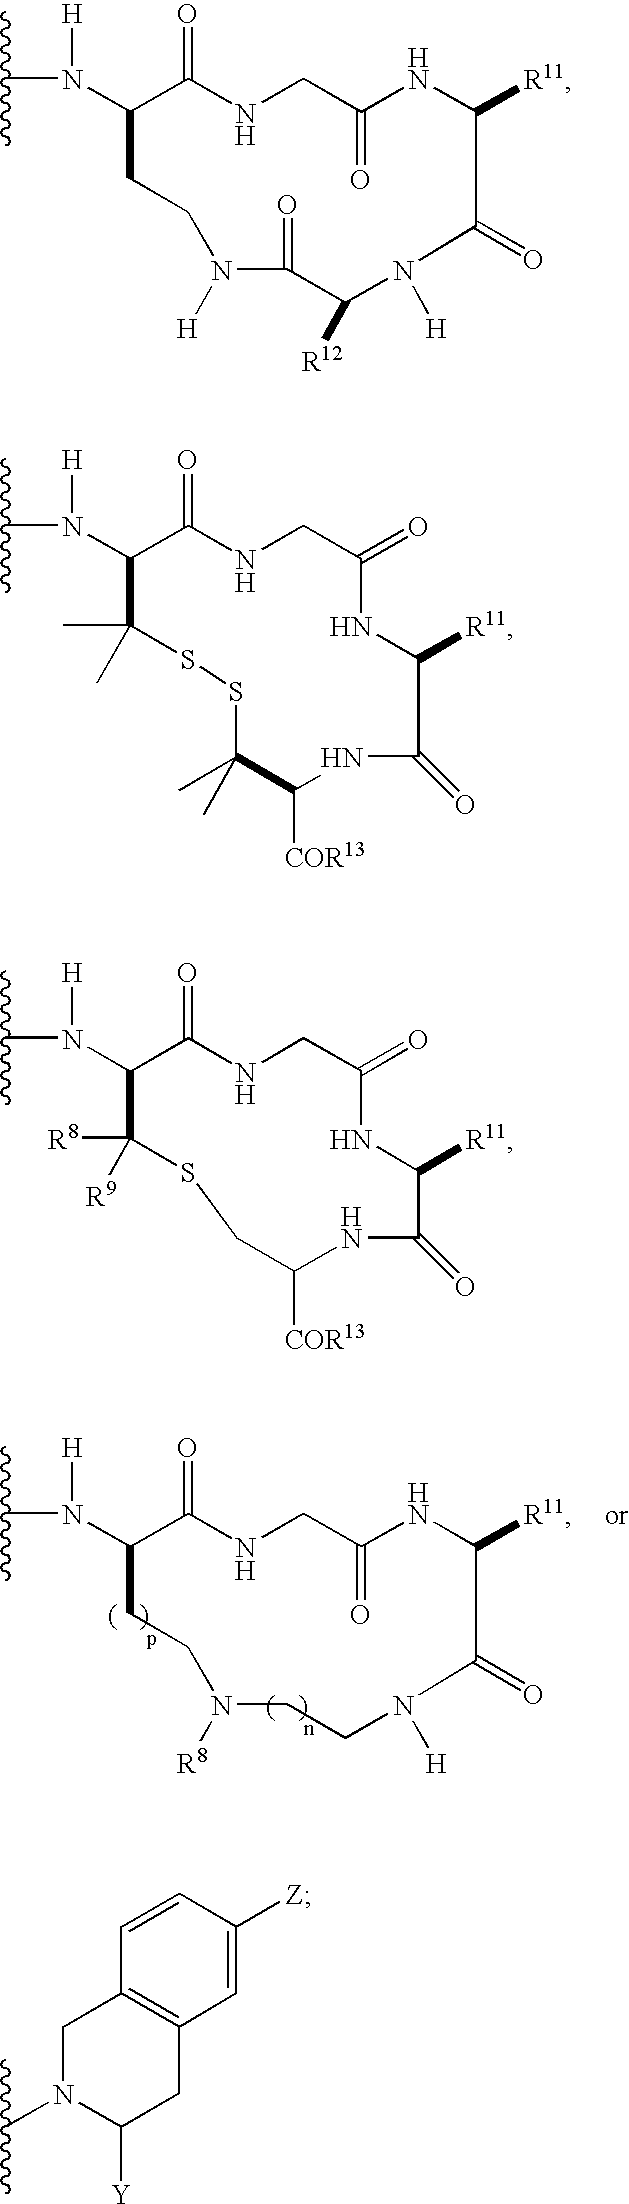 Carboxamide and amino derivatives and methods of their use